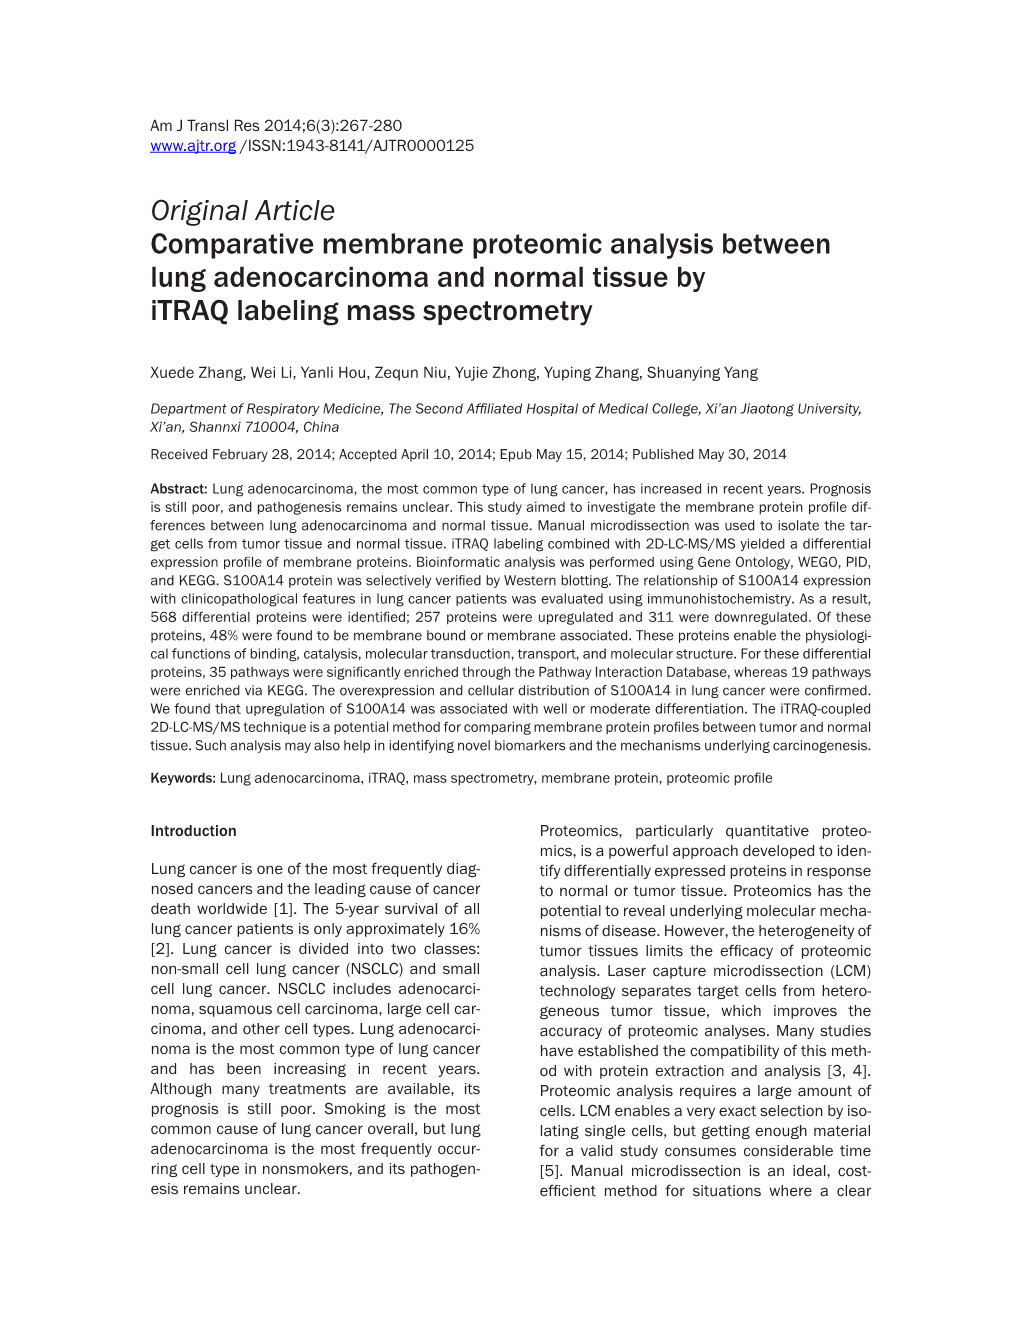 Original Article Comparative Membrane Proteomic Analysis Between Lung Adenocarcinoma and Normal Tissue by Itraq Labeling Mass Spectrometry